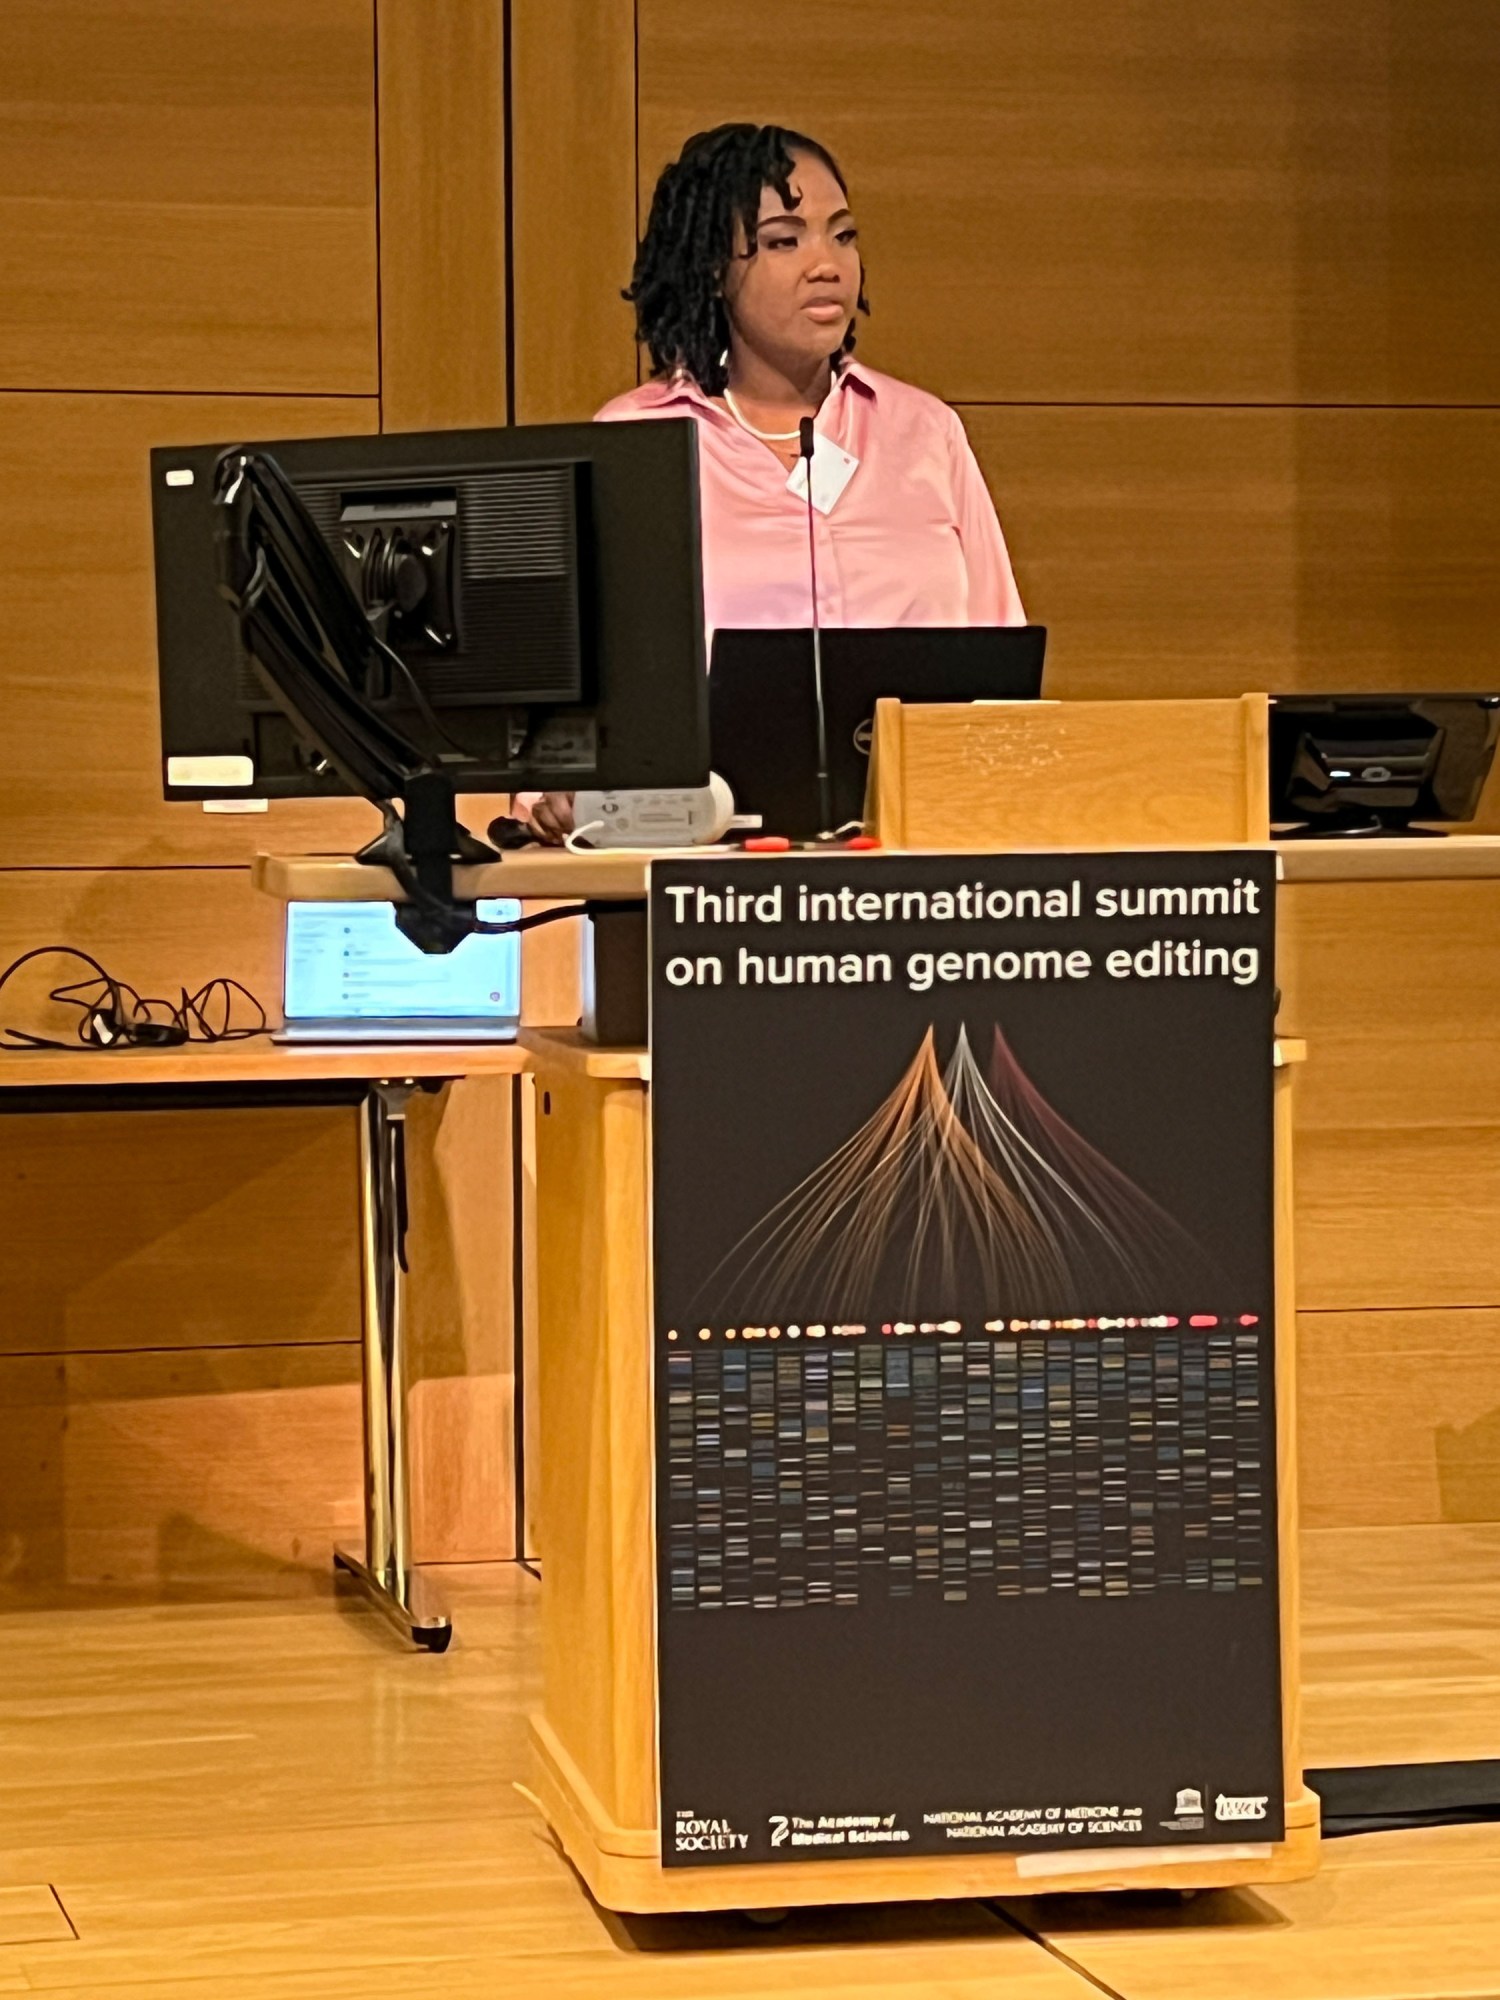 Victoria Gray at the podium speaking at the Third International Summit on Human Genome Editing in 2023